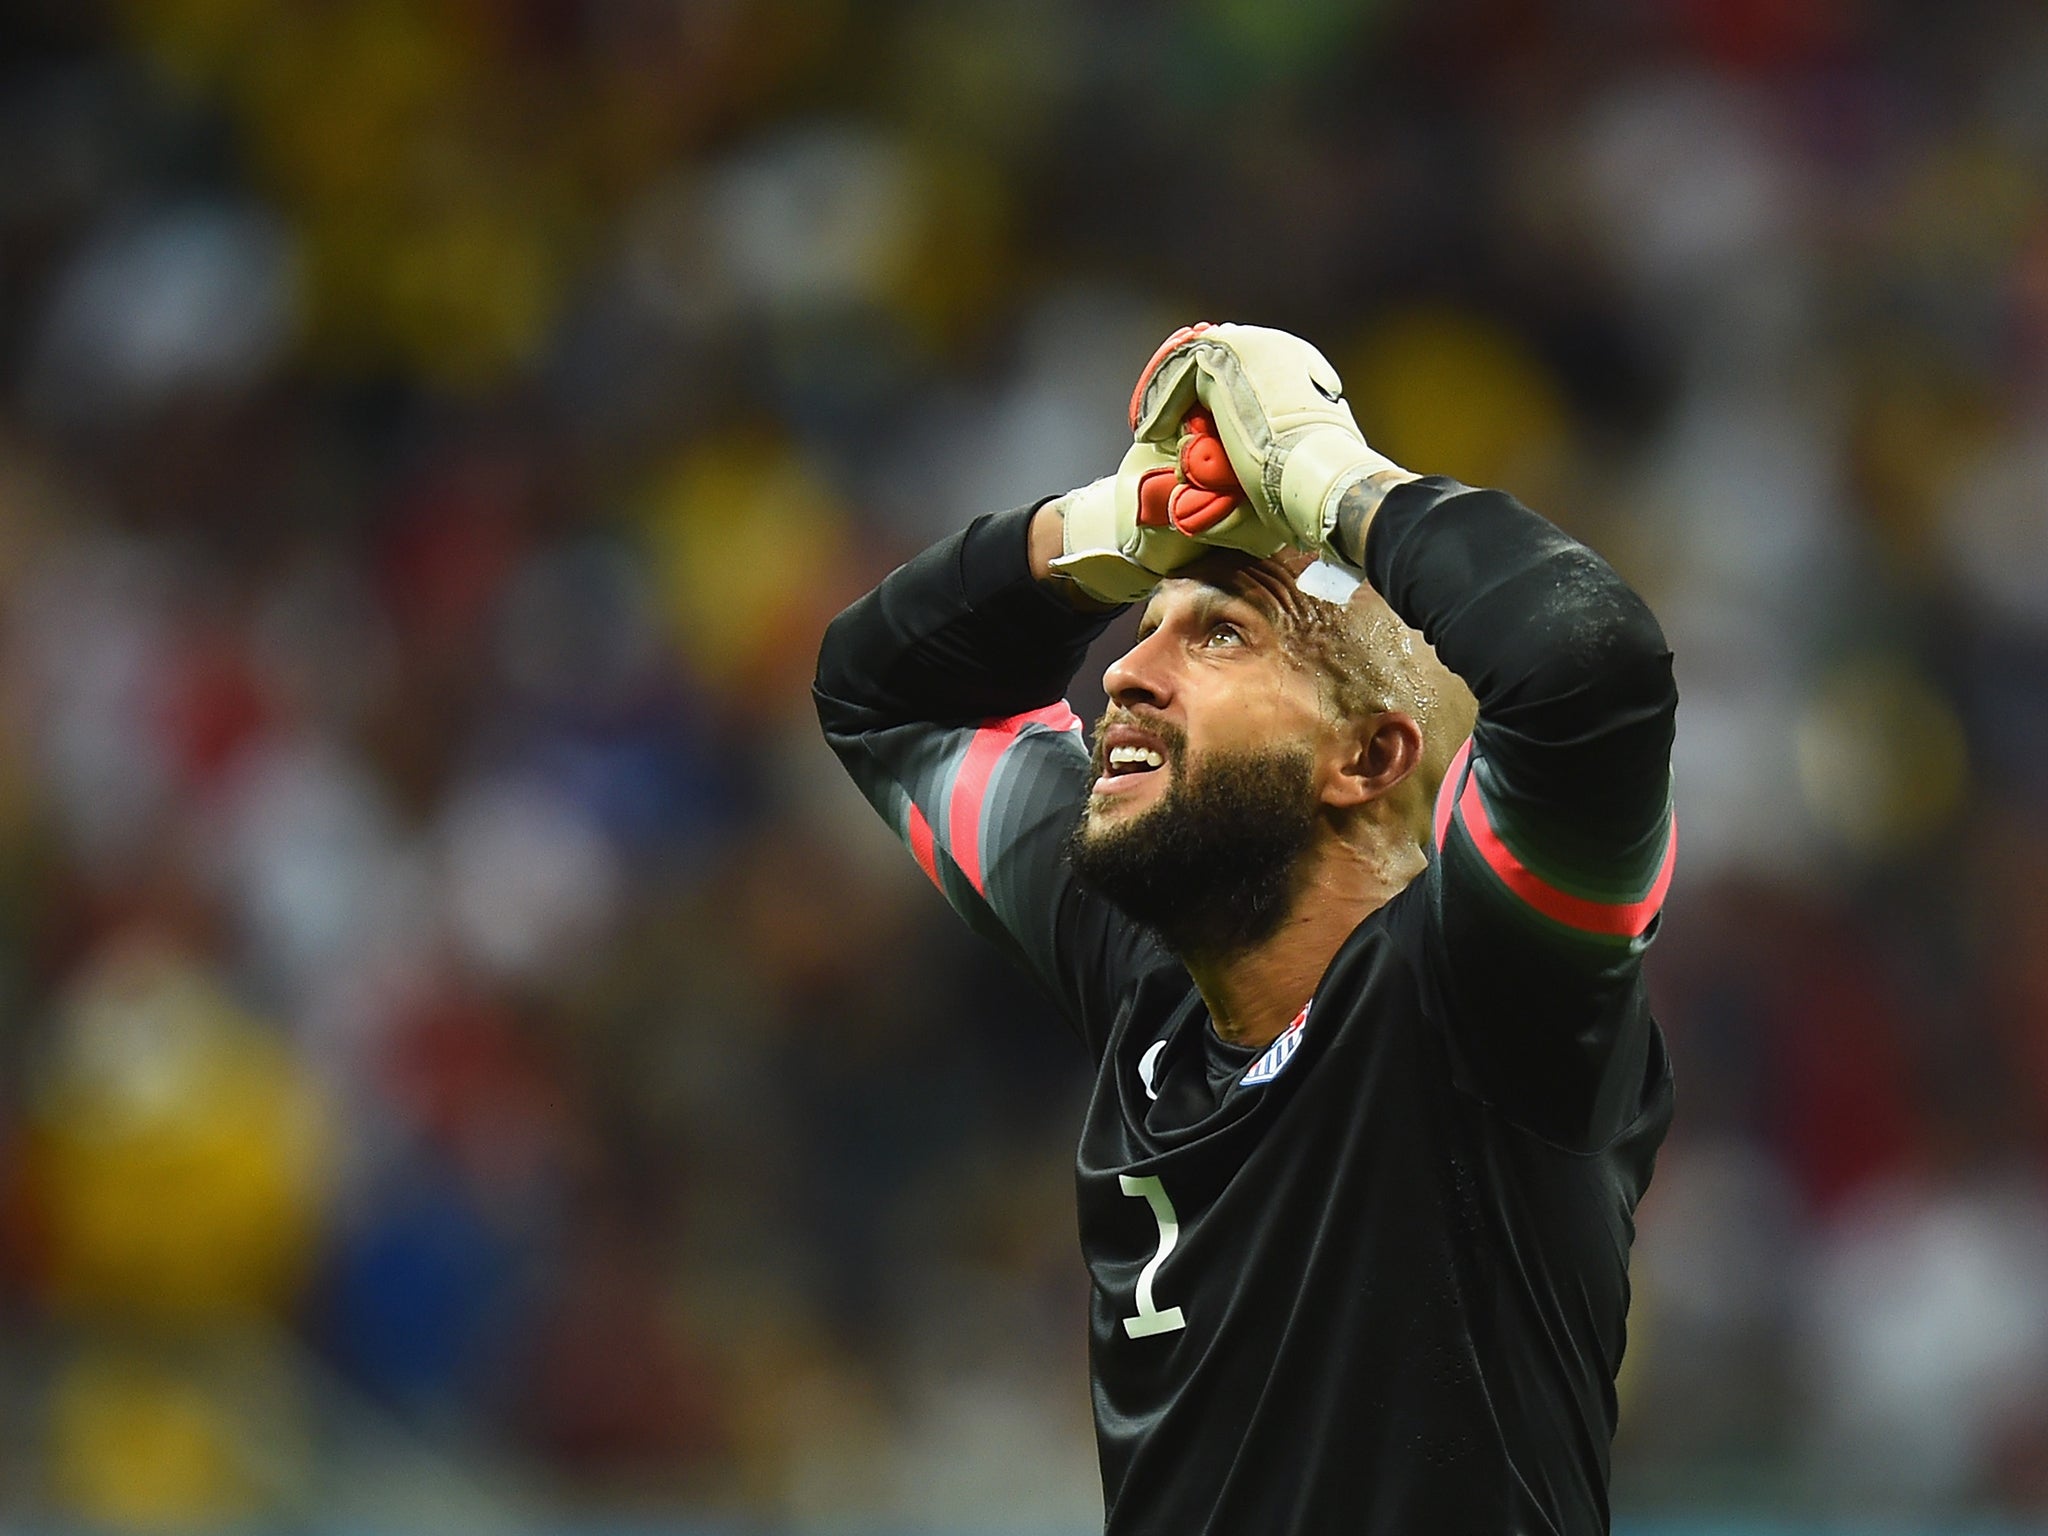 Tim Howard pictured in the defeat to Belgium